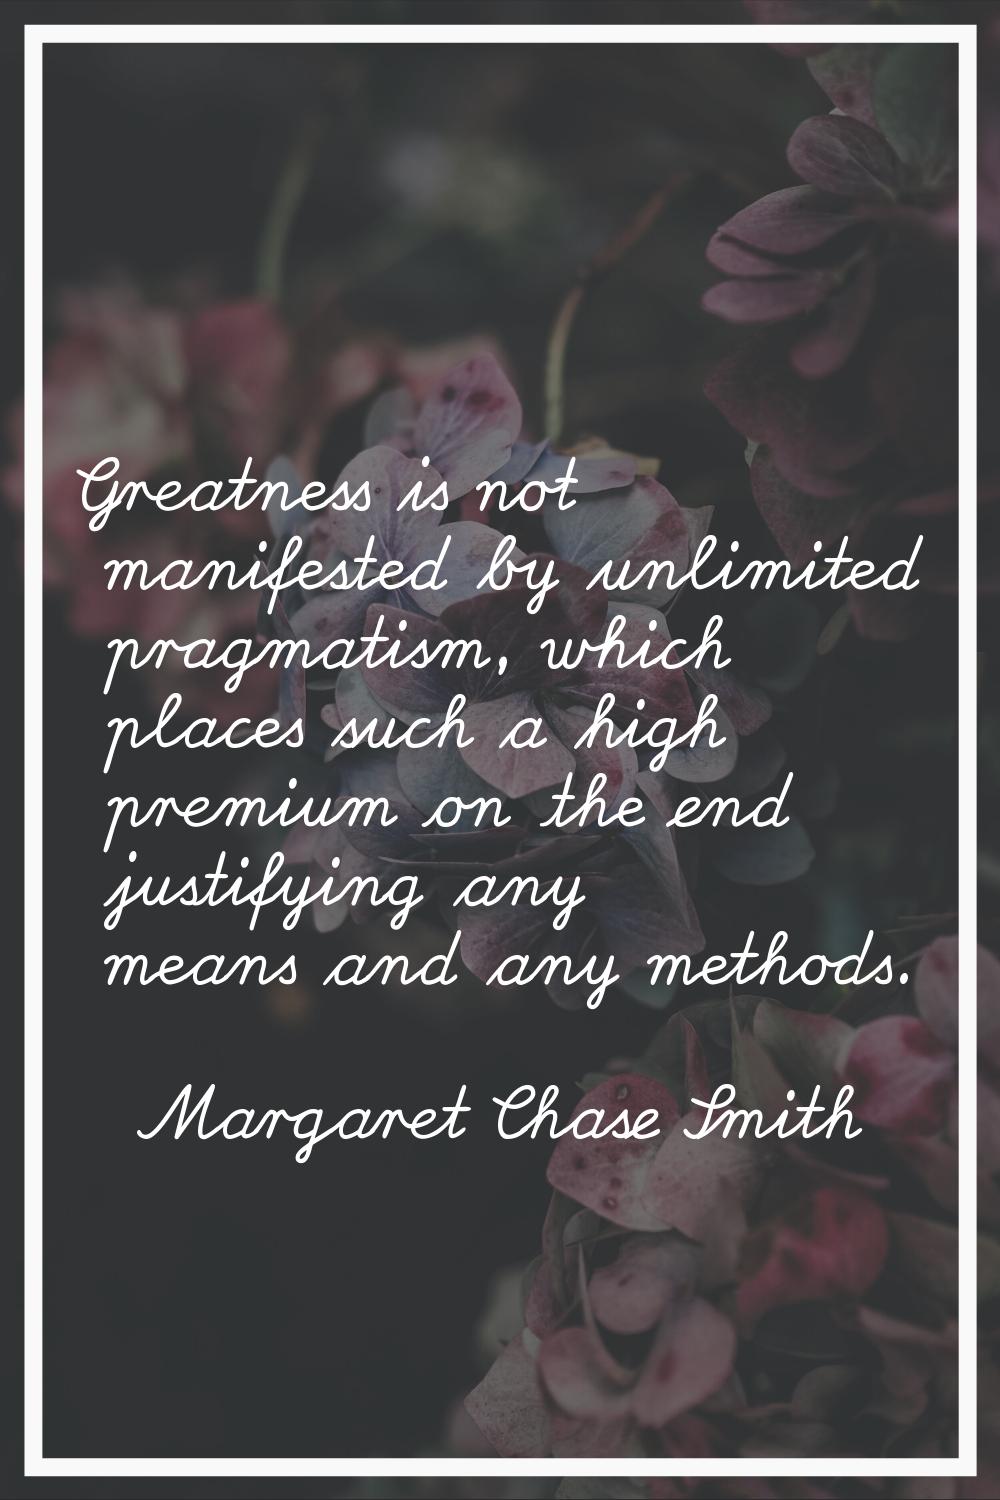 Greatness is not manifested by unlimited pragmatism, which places such a high premium on the end ju